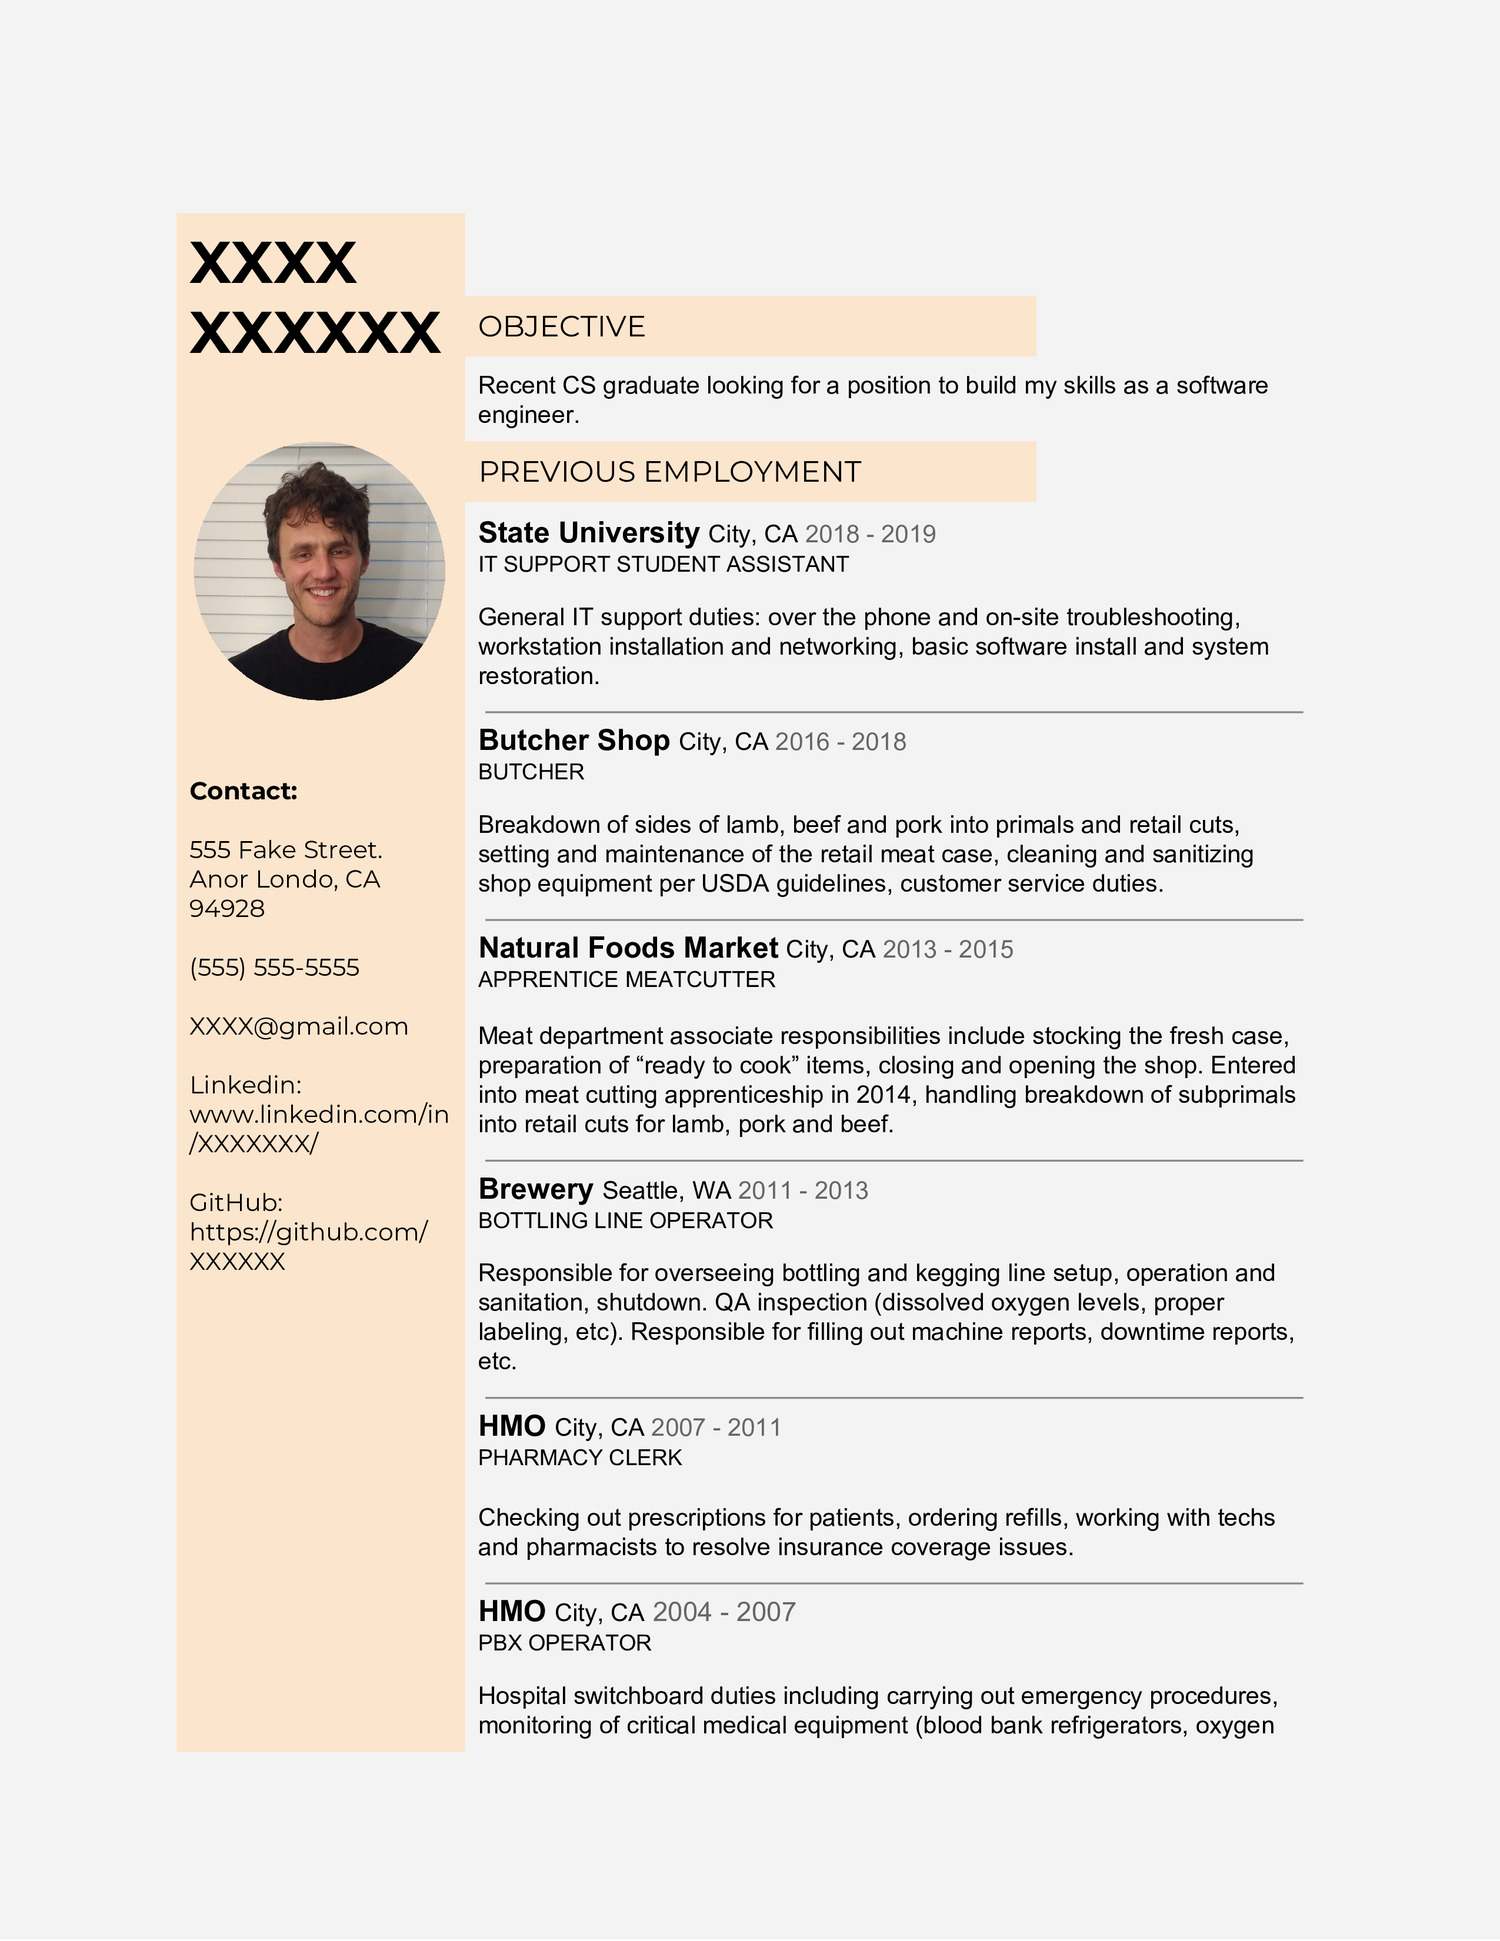 resume examples for butcher